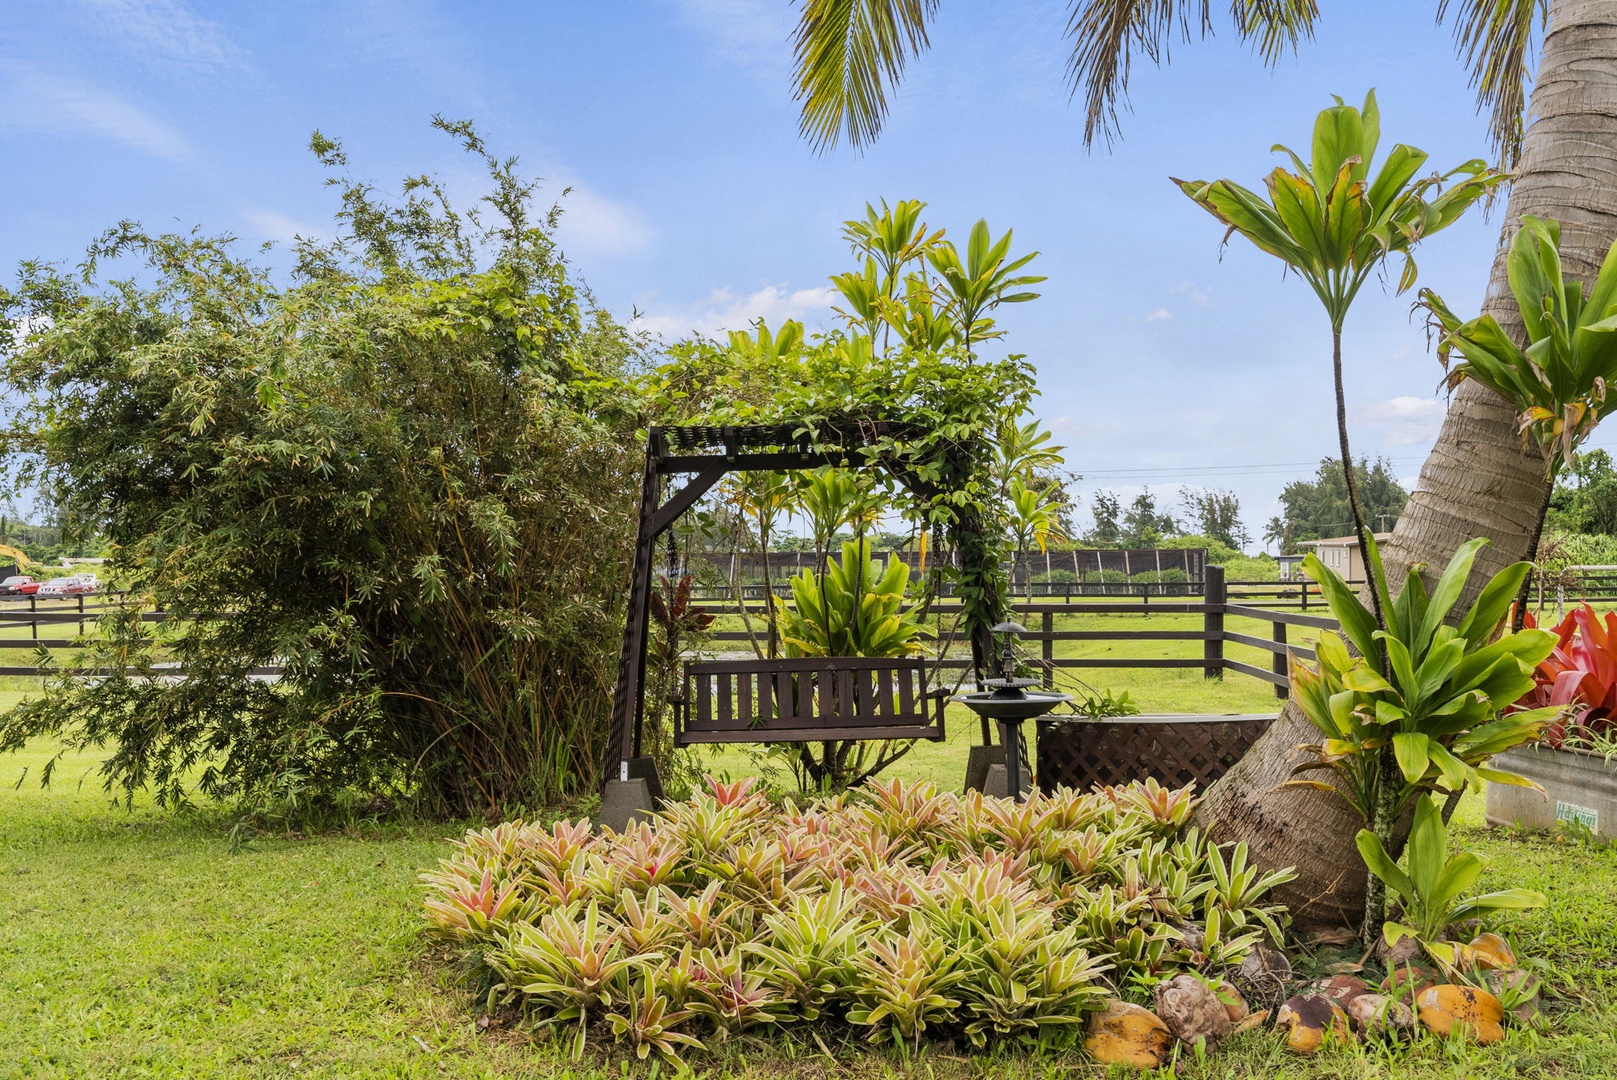 Hauula Vacation Rentals, Mau Loa Hale - Relaxing swing and amazing landscapting